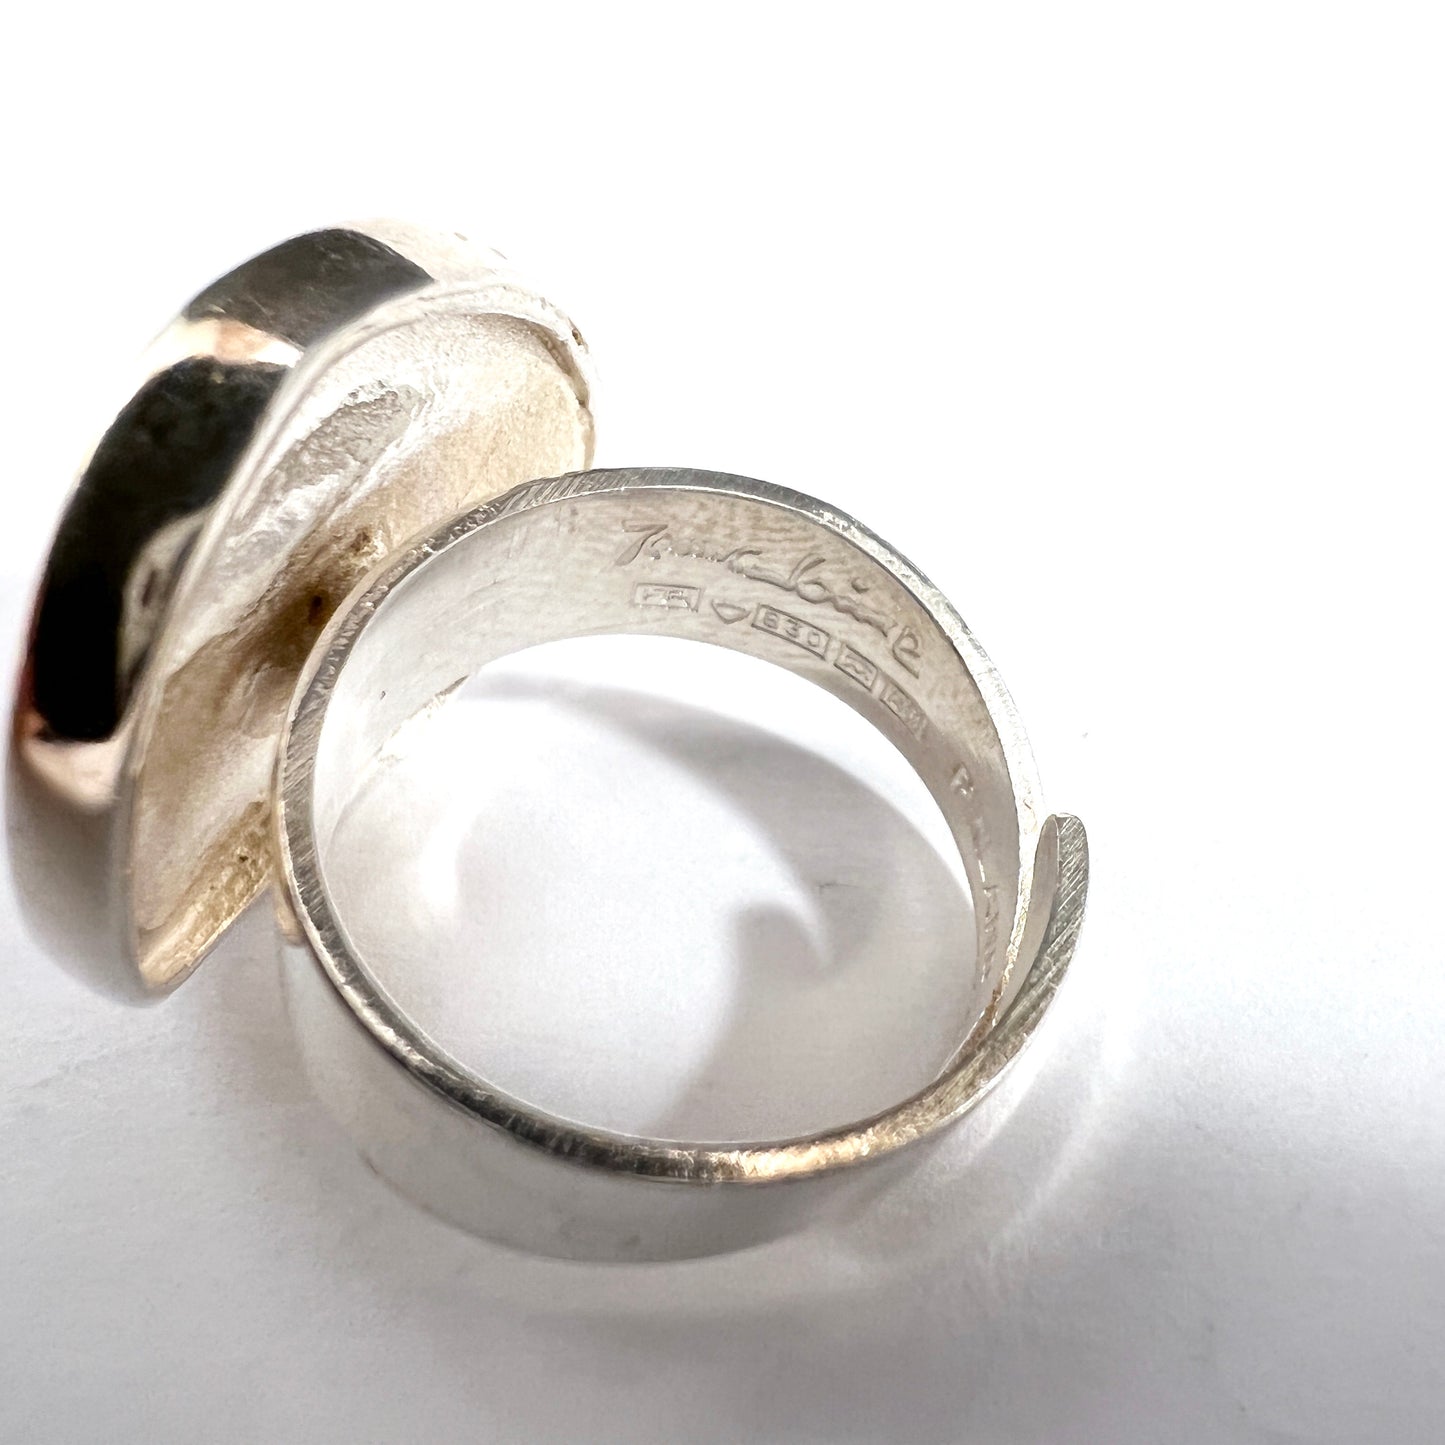 Jorma Laine for Turun Hopea Finland 1978. Solid Silver Ring. Design "Chic". Signed.